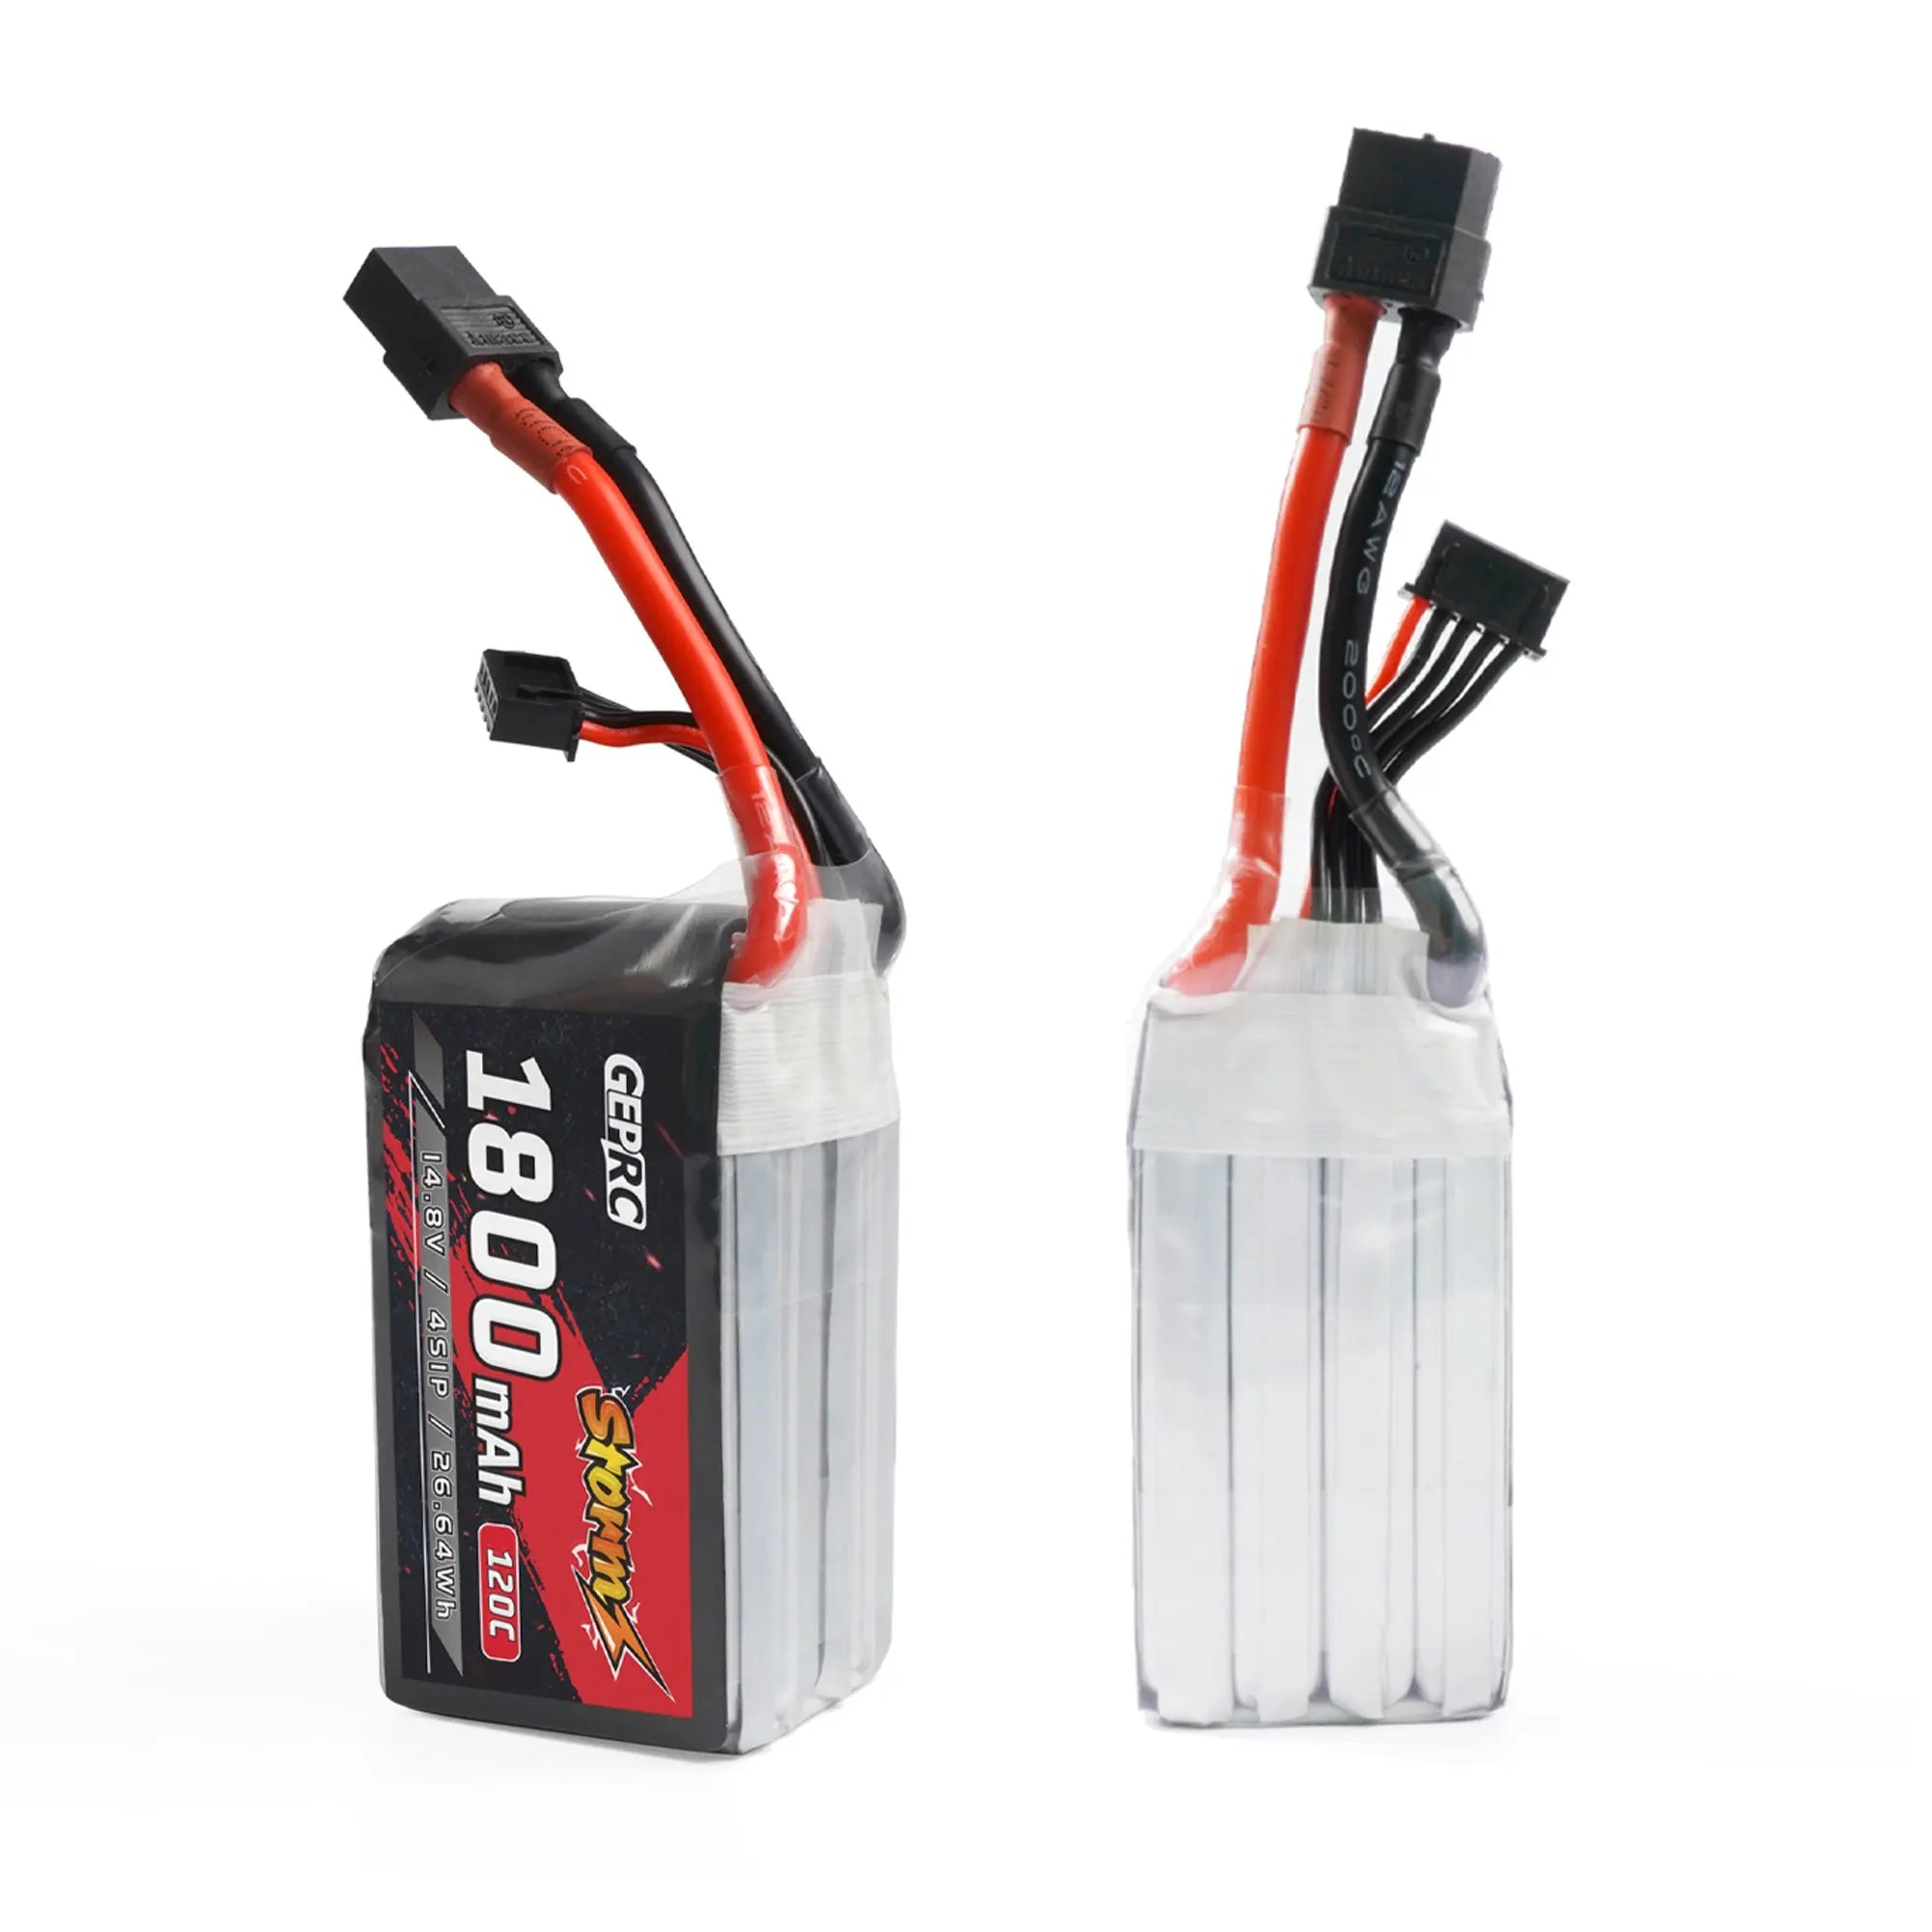 GEPRC Storm 4S 1800mAh 120C Lipo Battery, higher discharge multiplier, higher discharge current, more powerful 